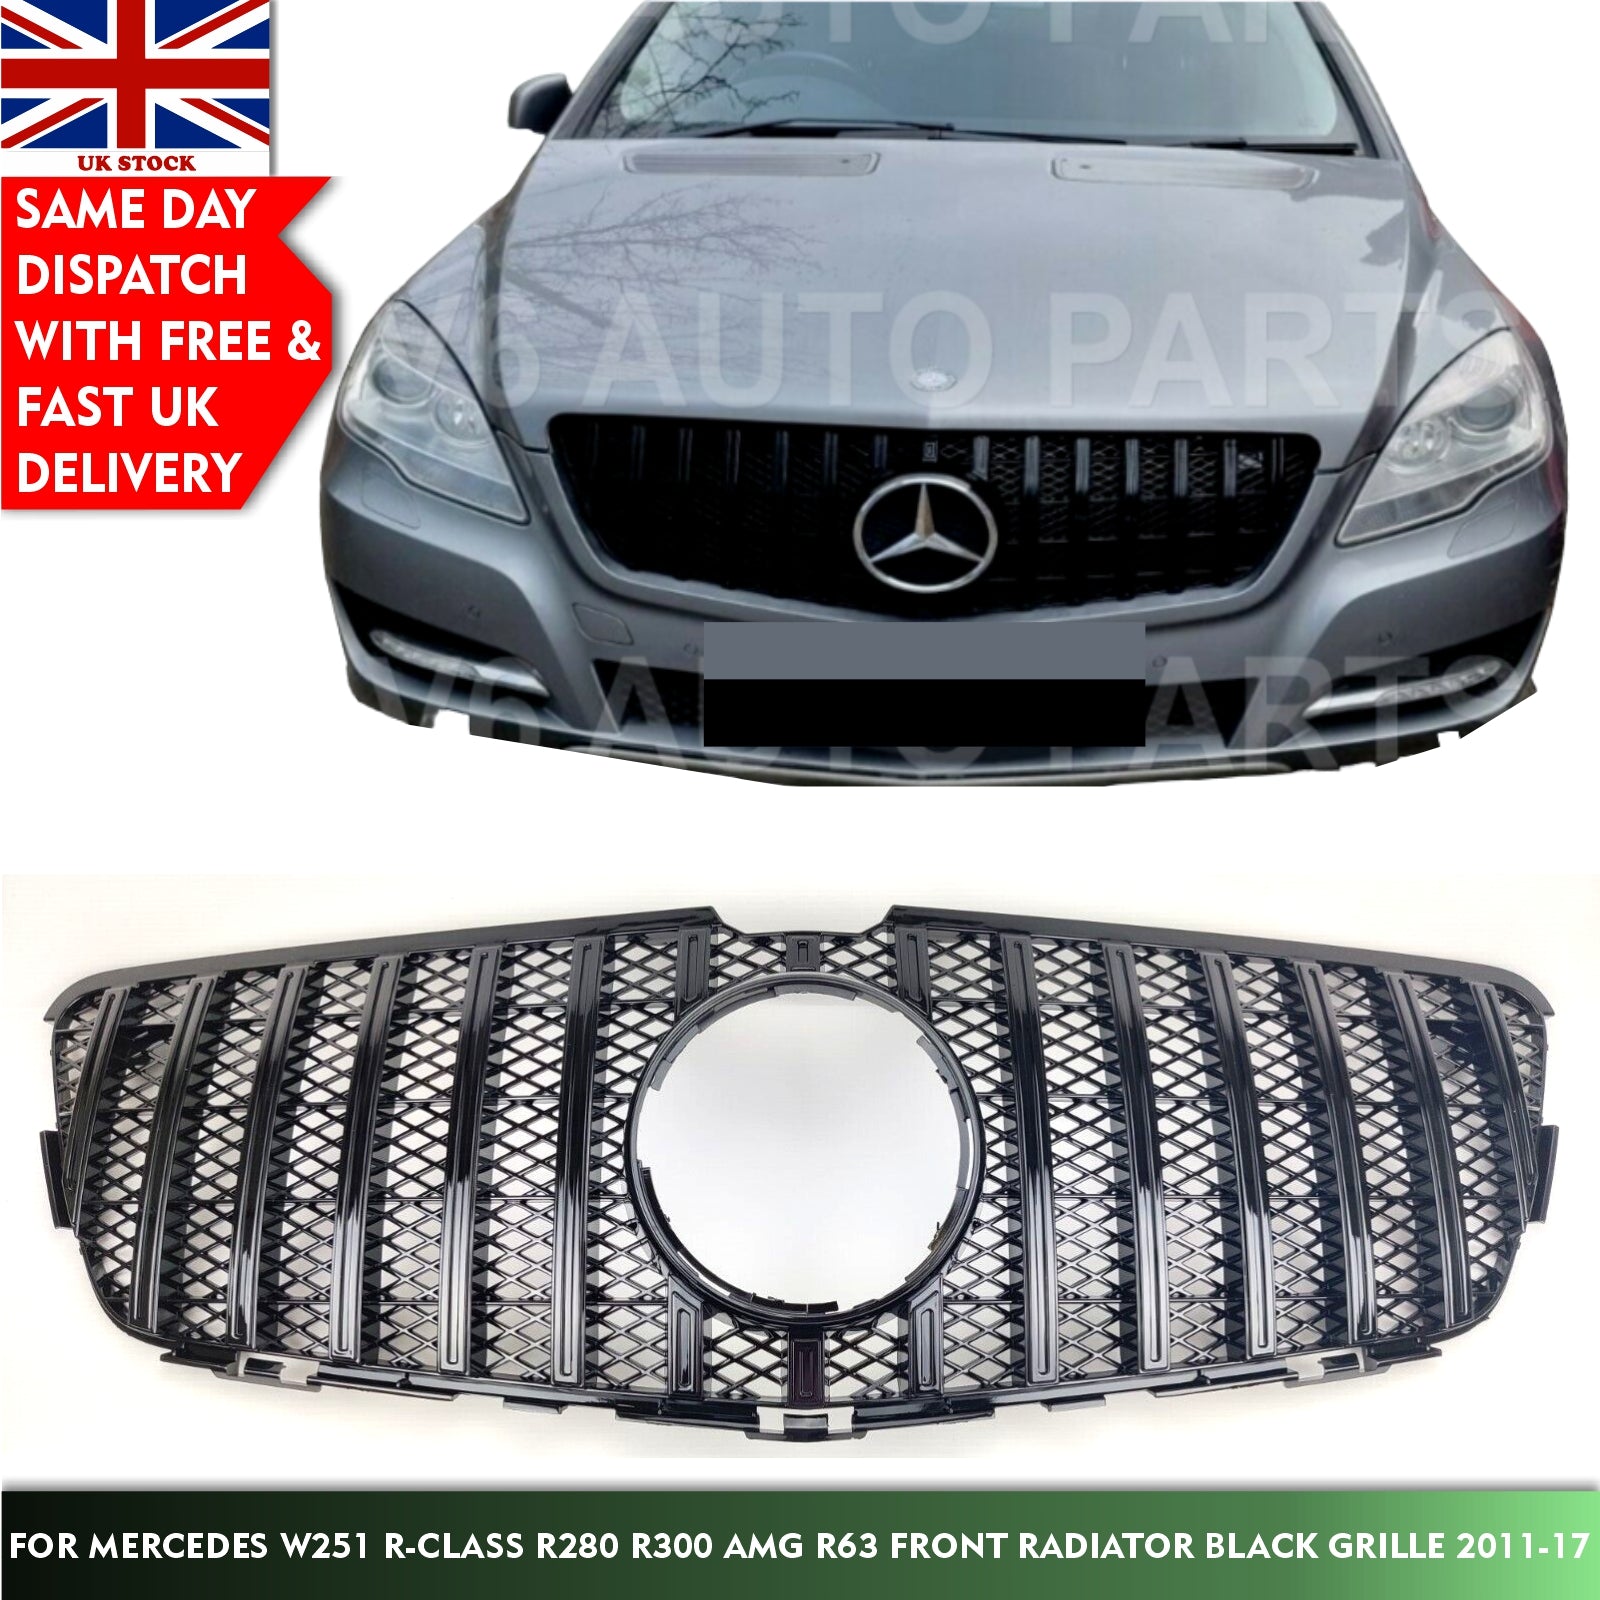 For Mercedes W251 R-Class AMG R63 R280CDI Front Radiator Black GT Grille 2011-17